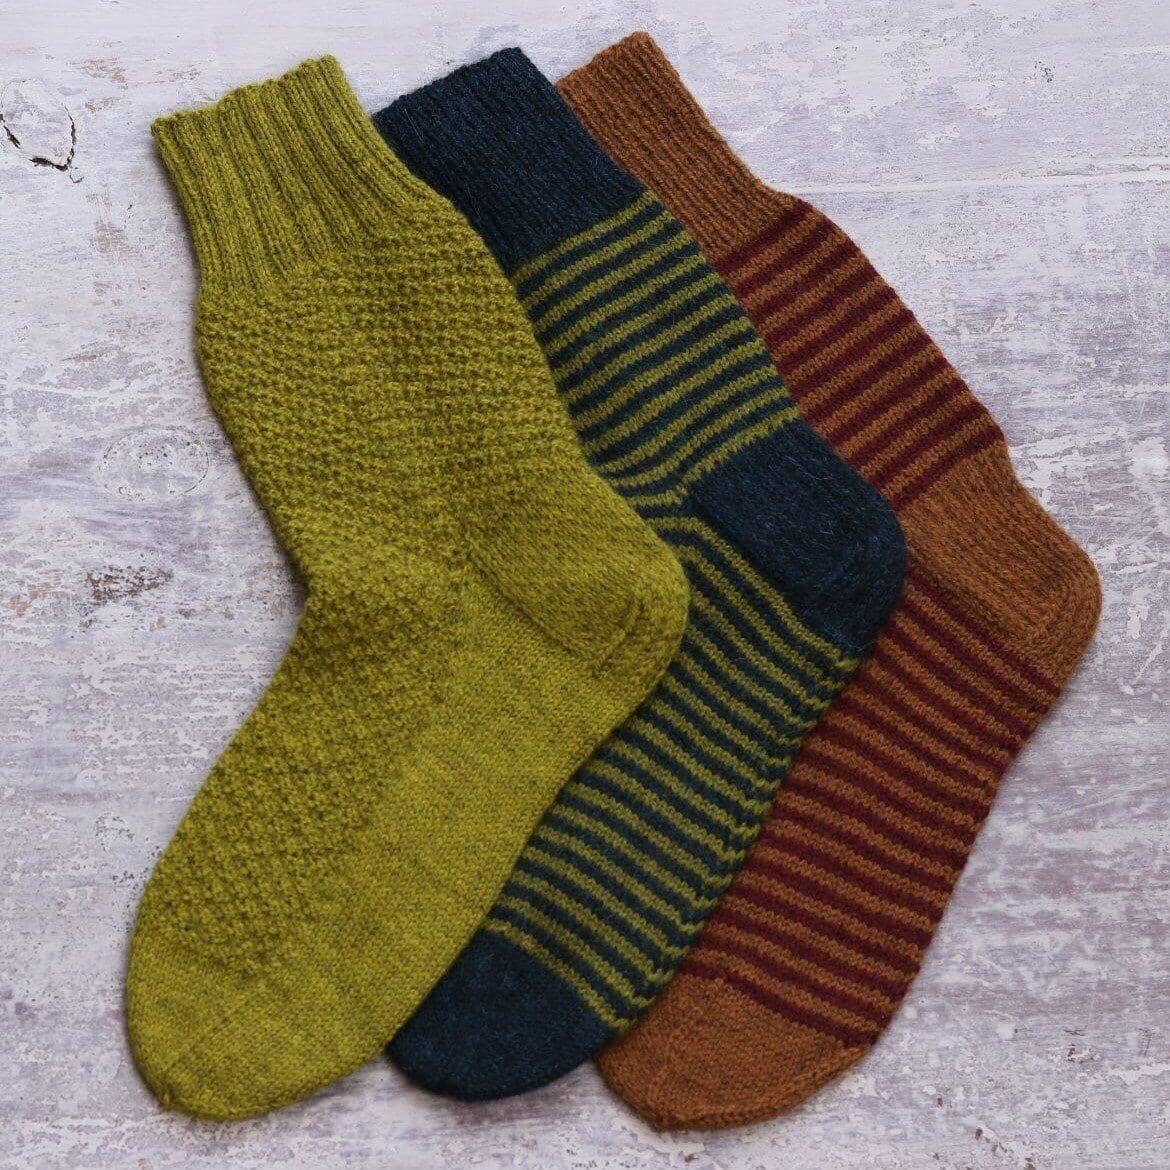 One Sock by The Fibre Co. knit in Amble